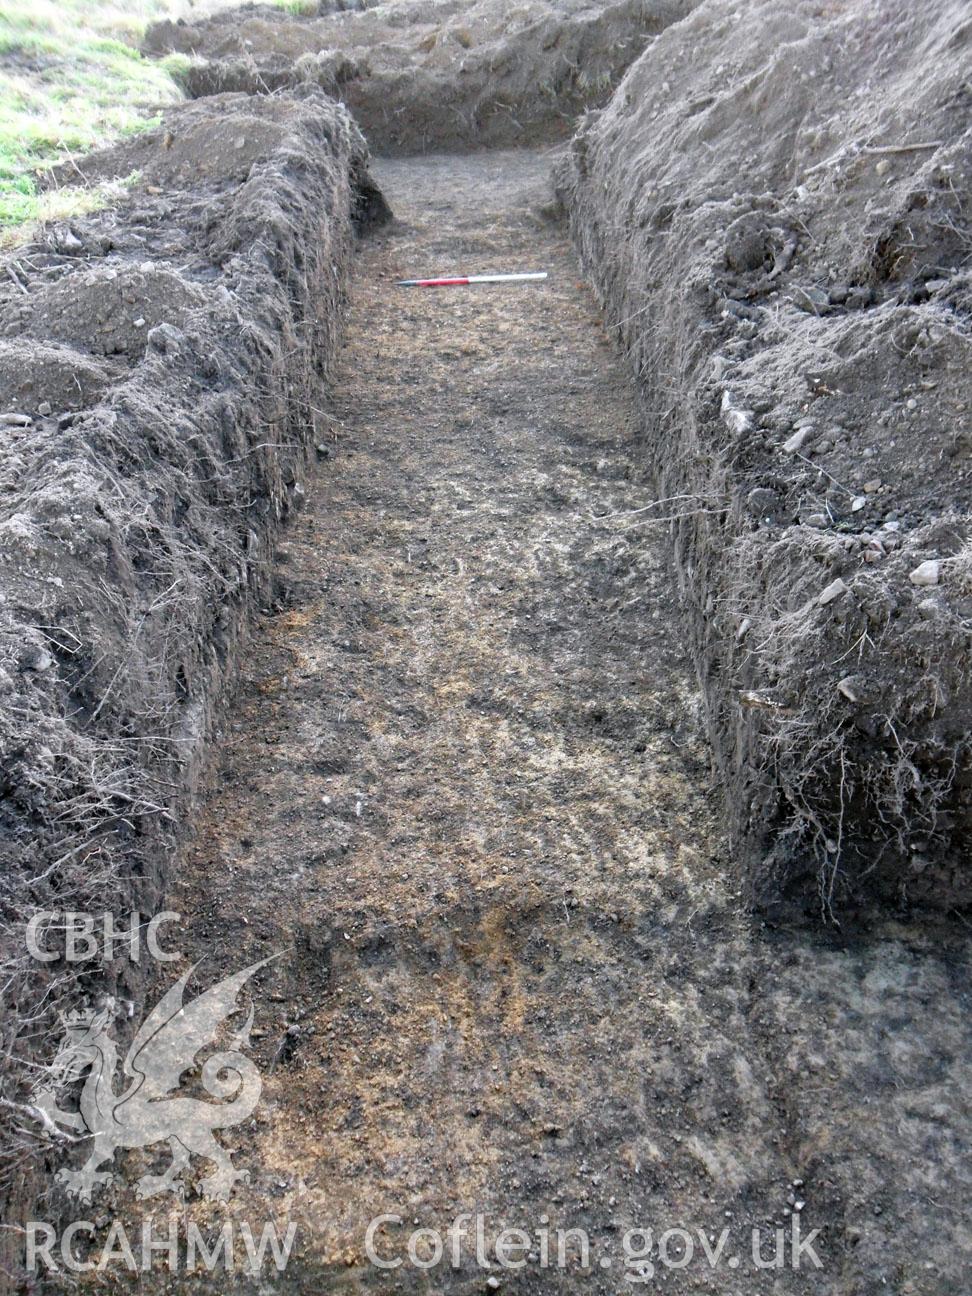 Digital colour photograph showing archaeological investigation at Upper House Farm, Painscastle, Powys. Included as material relating to archaeological field evaluation of Upper House Farm, written by Chris E Smith of Archaeology Wales.